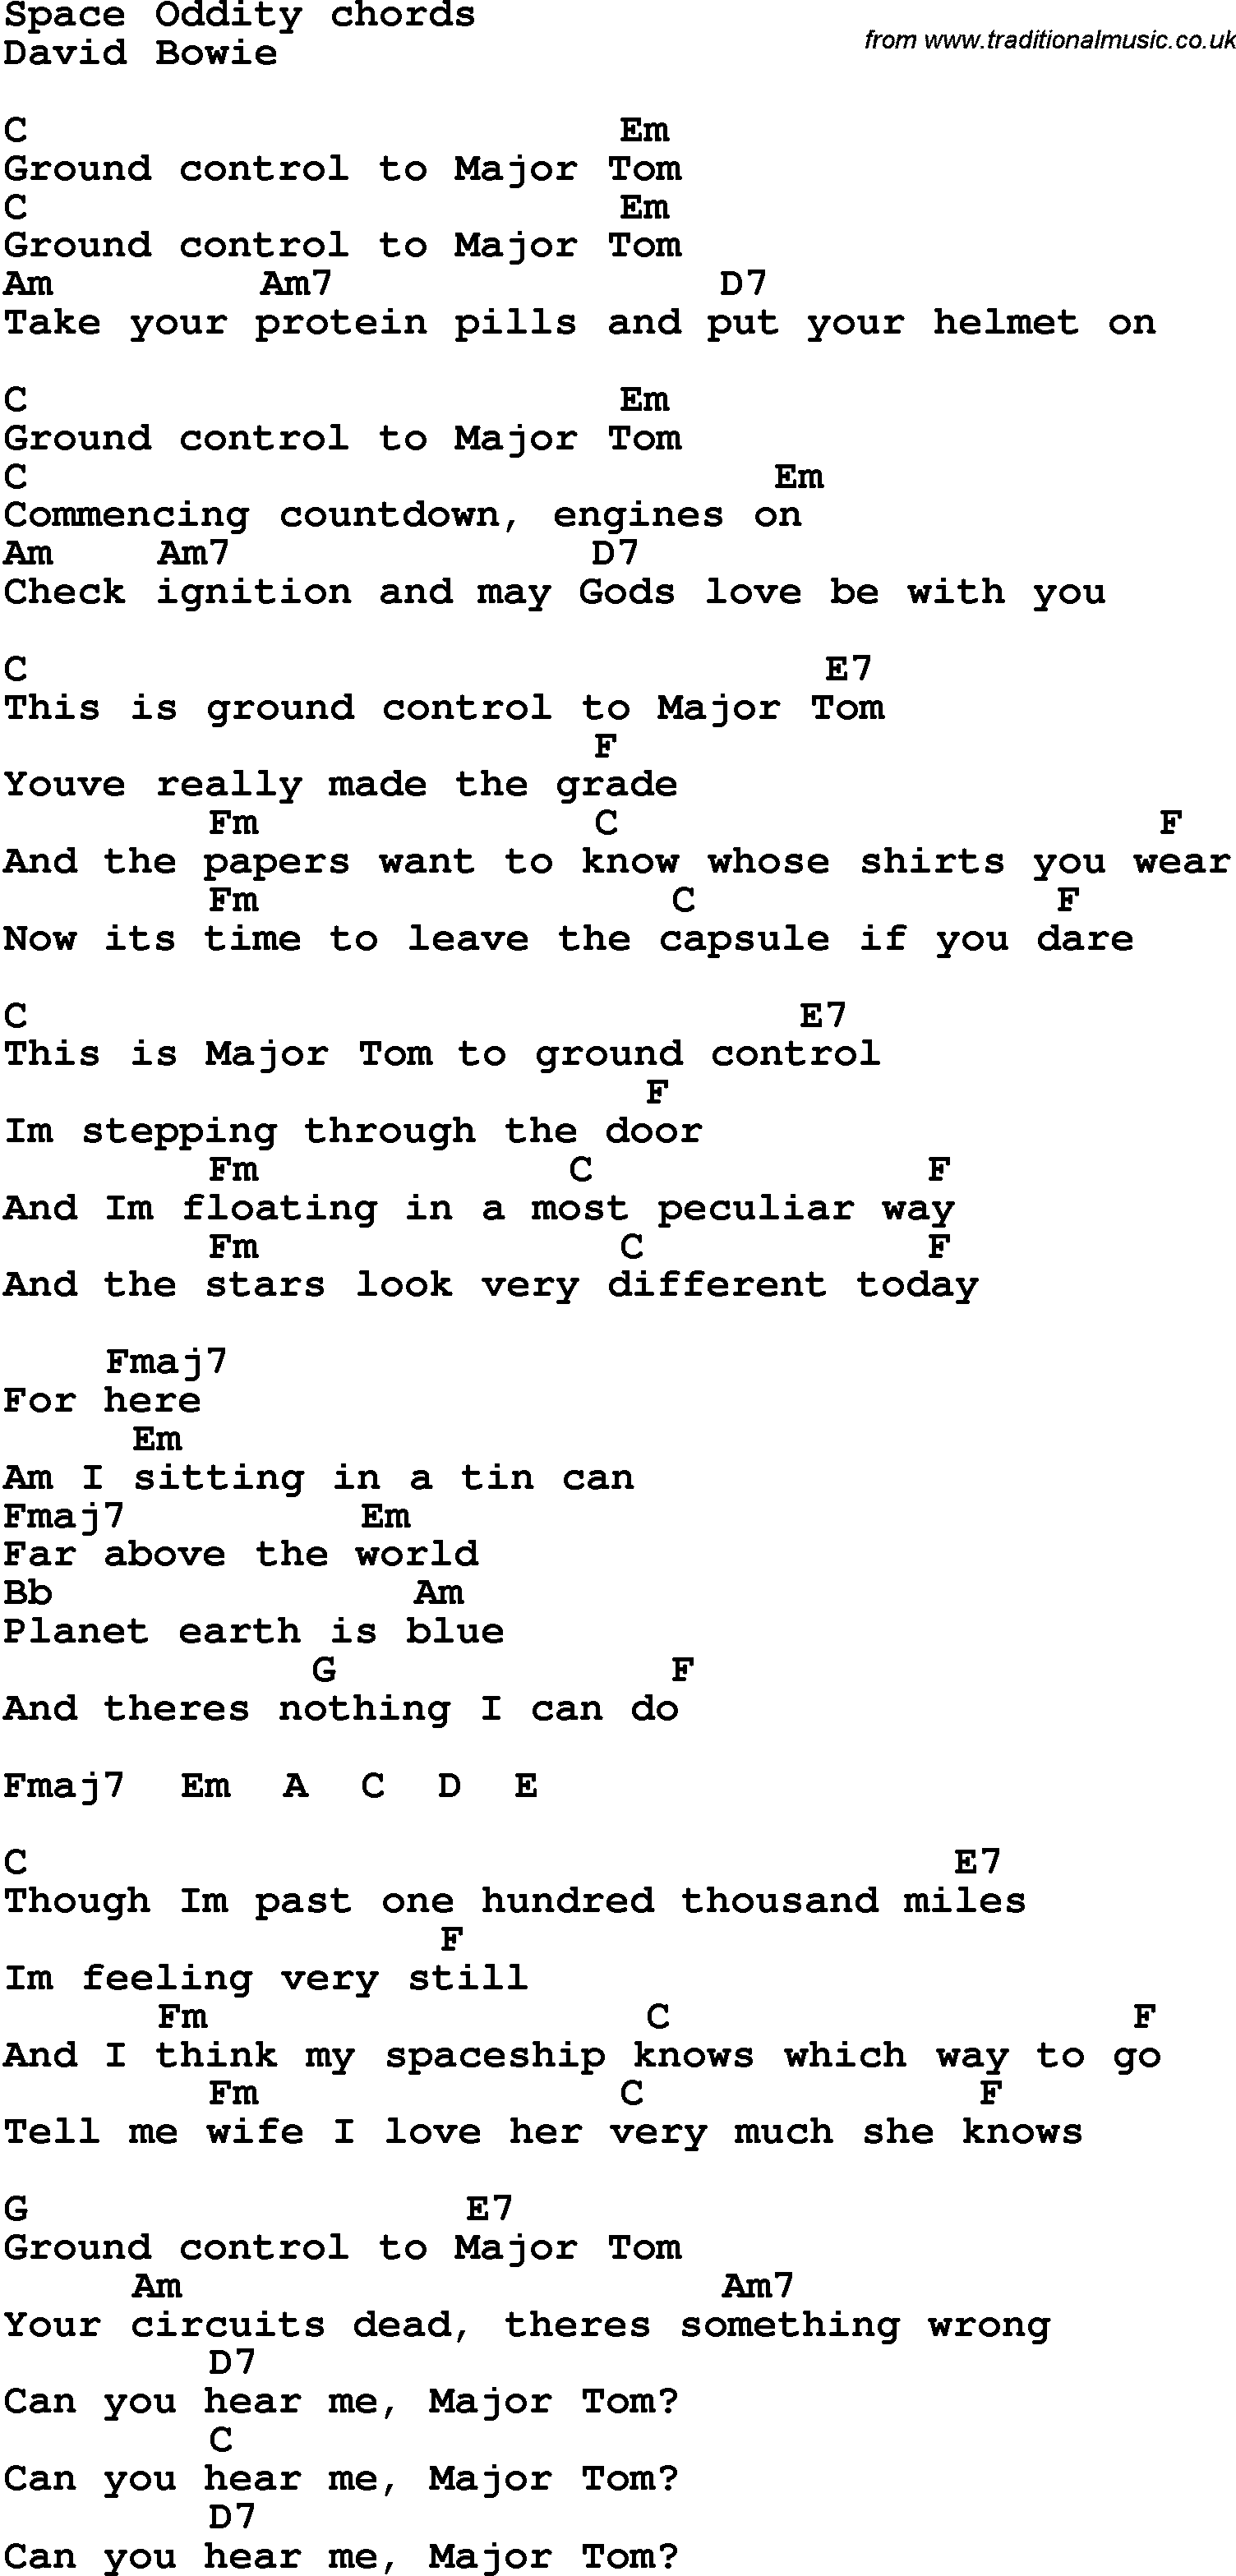 Song Lyrics with guitar chords for Space Oddity